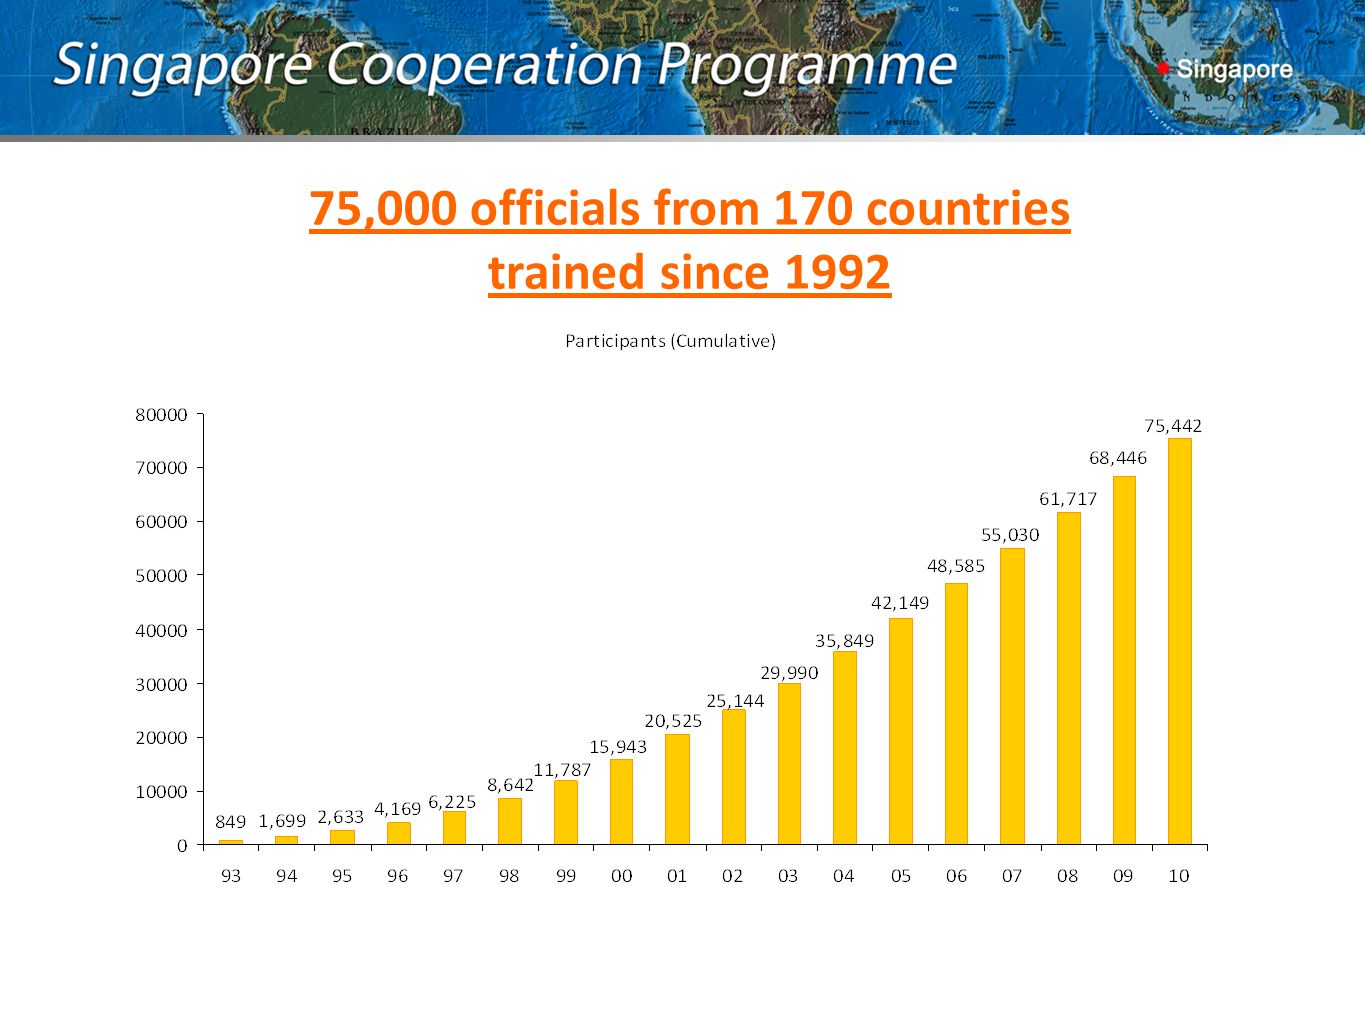 75,000 officials from 170 countries trained since 1992